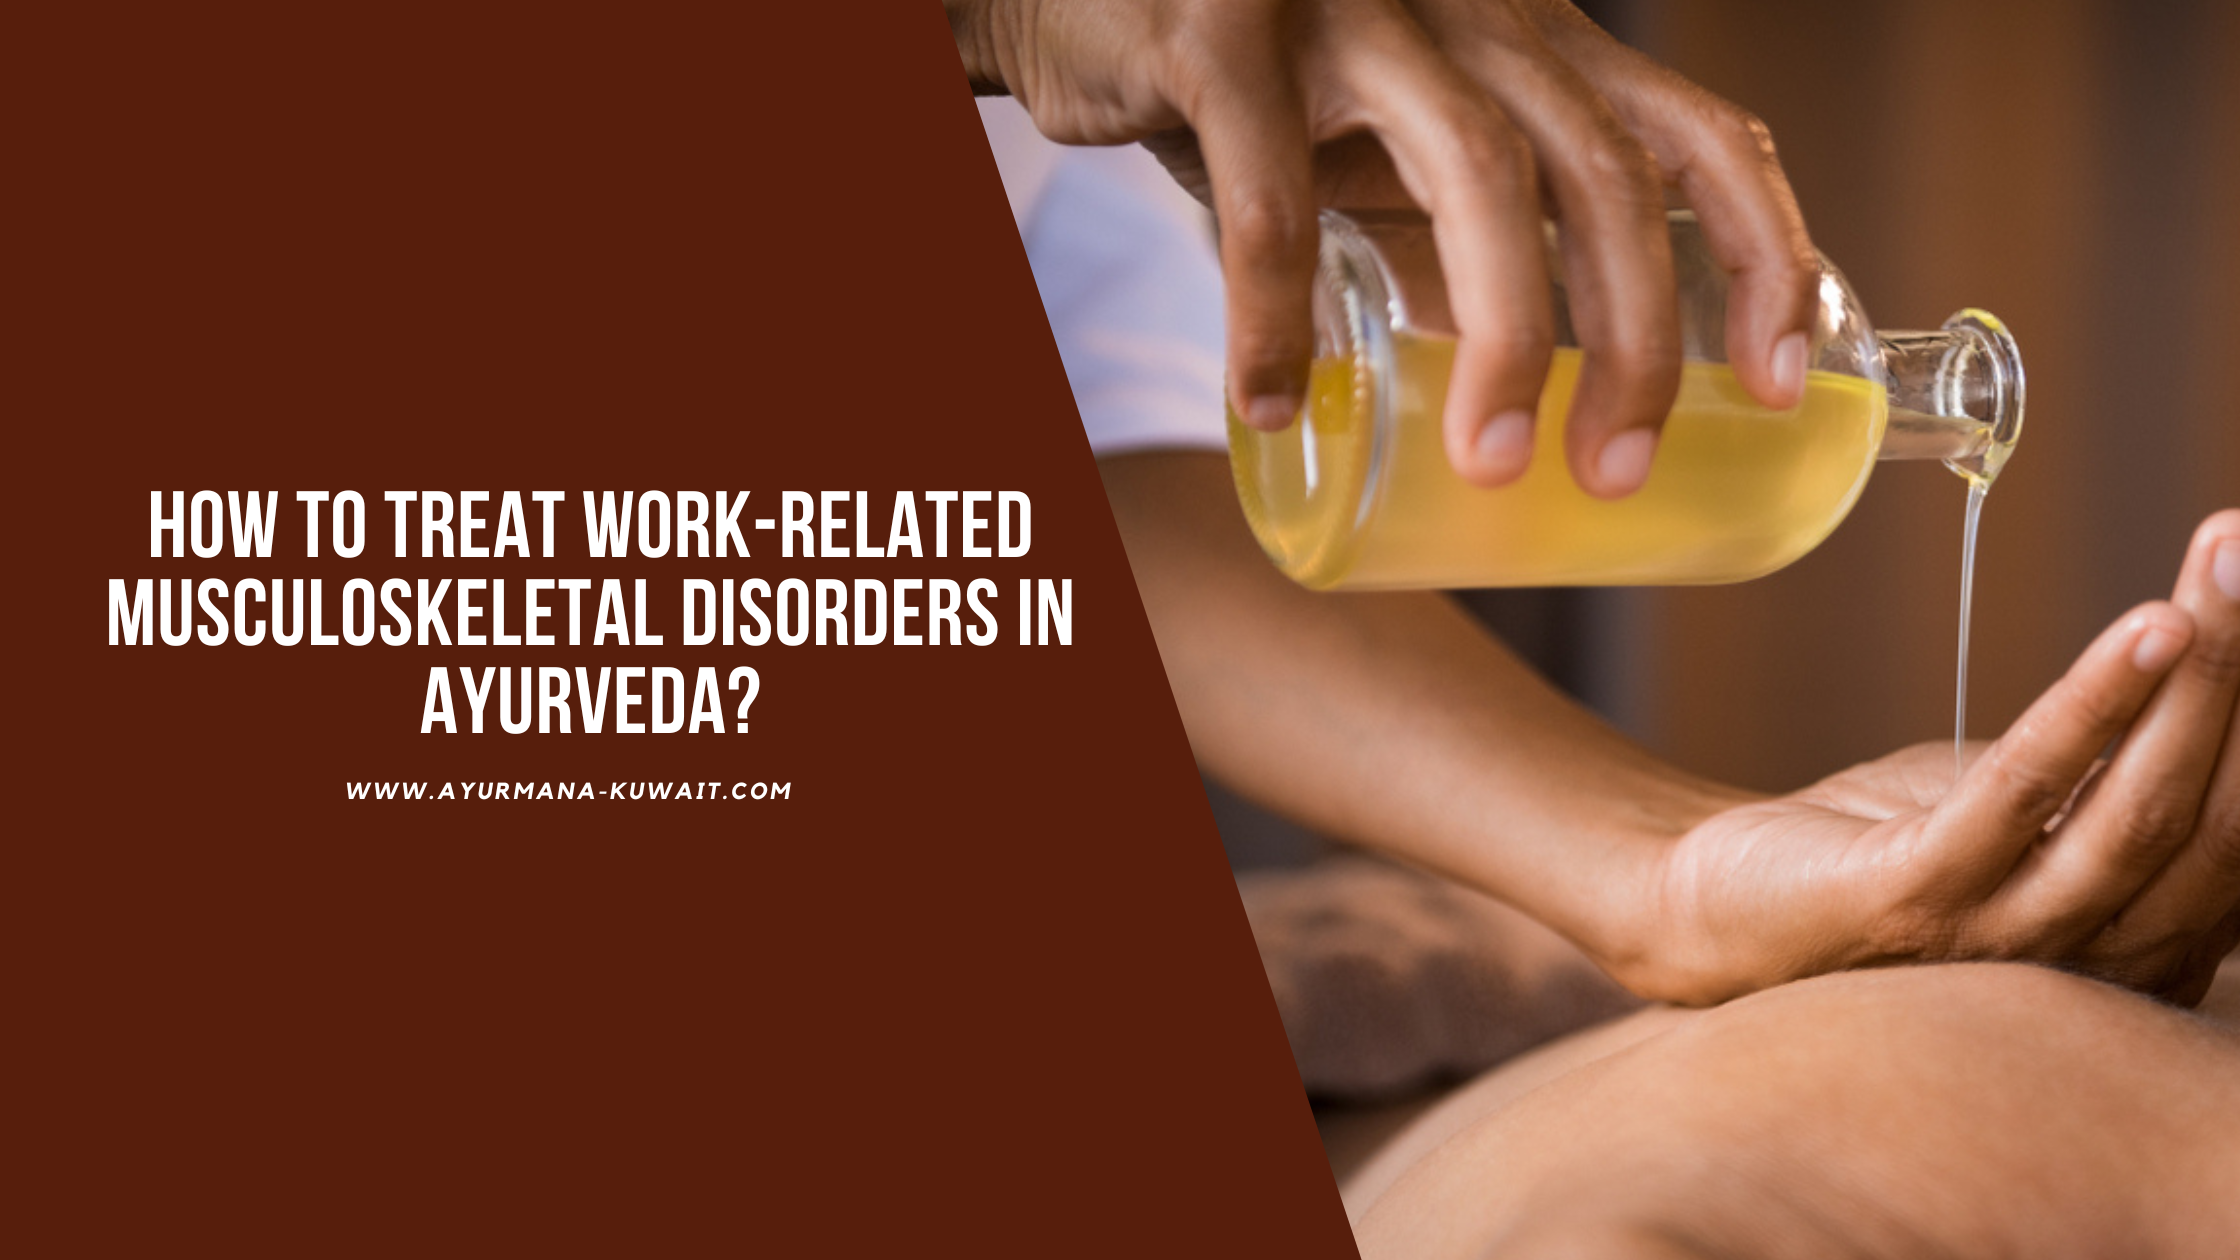 How to treat Work-Related Musculoskeletal Disorders in Ayurveda?